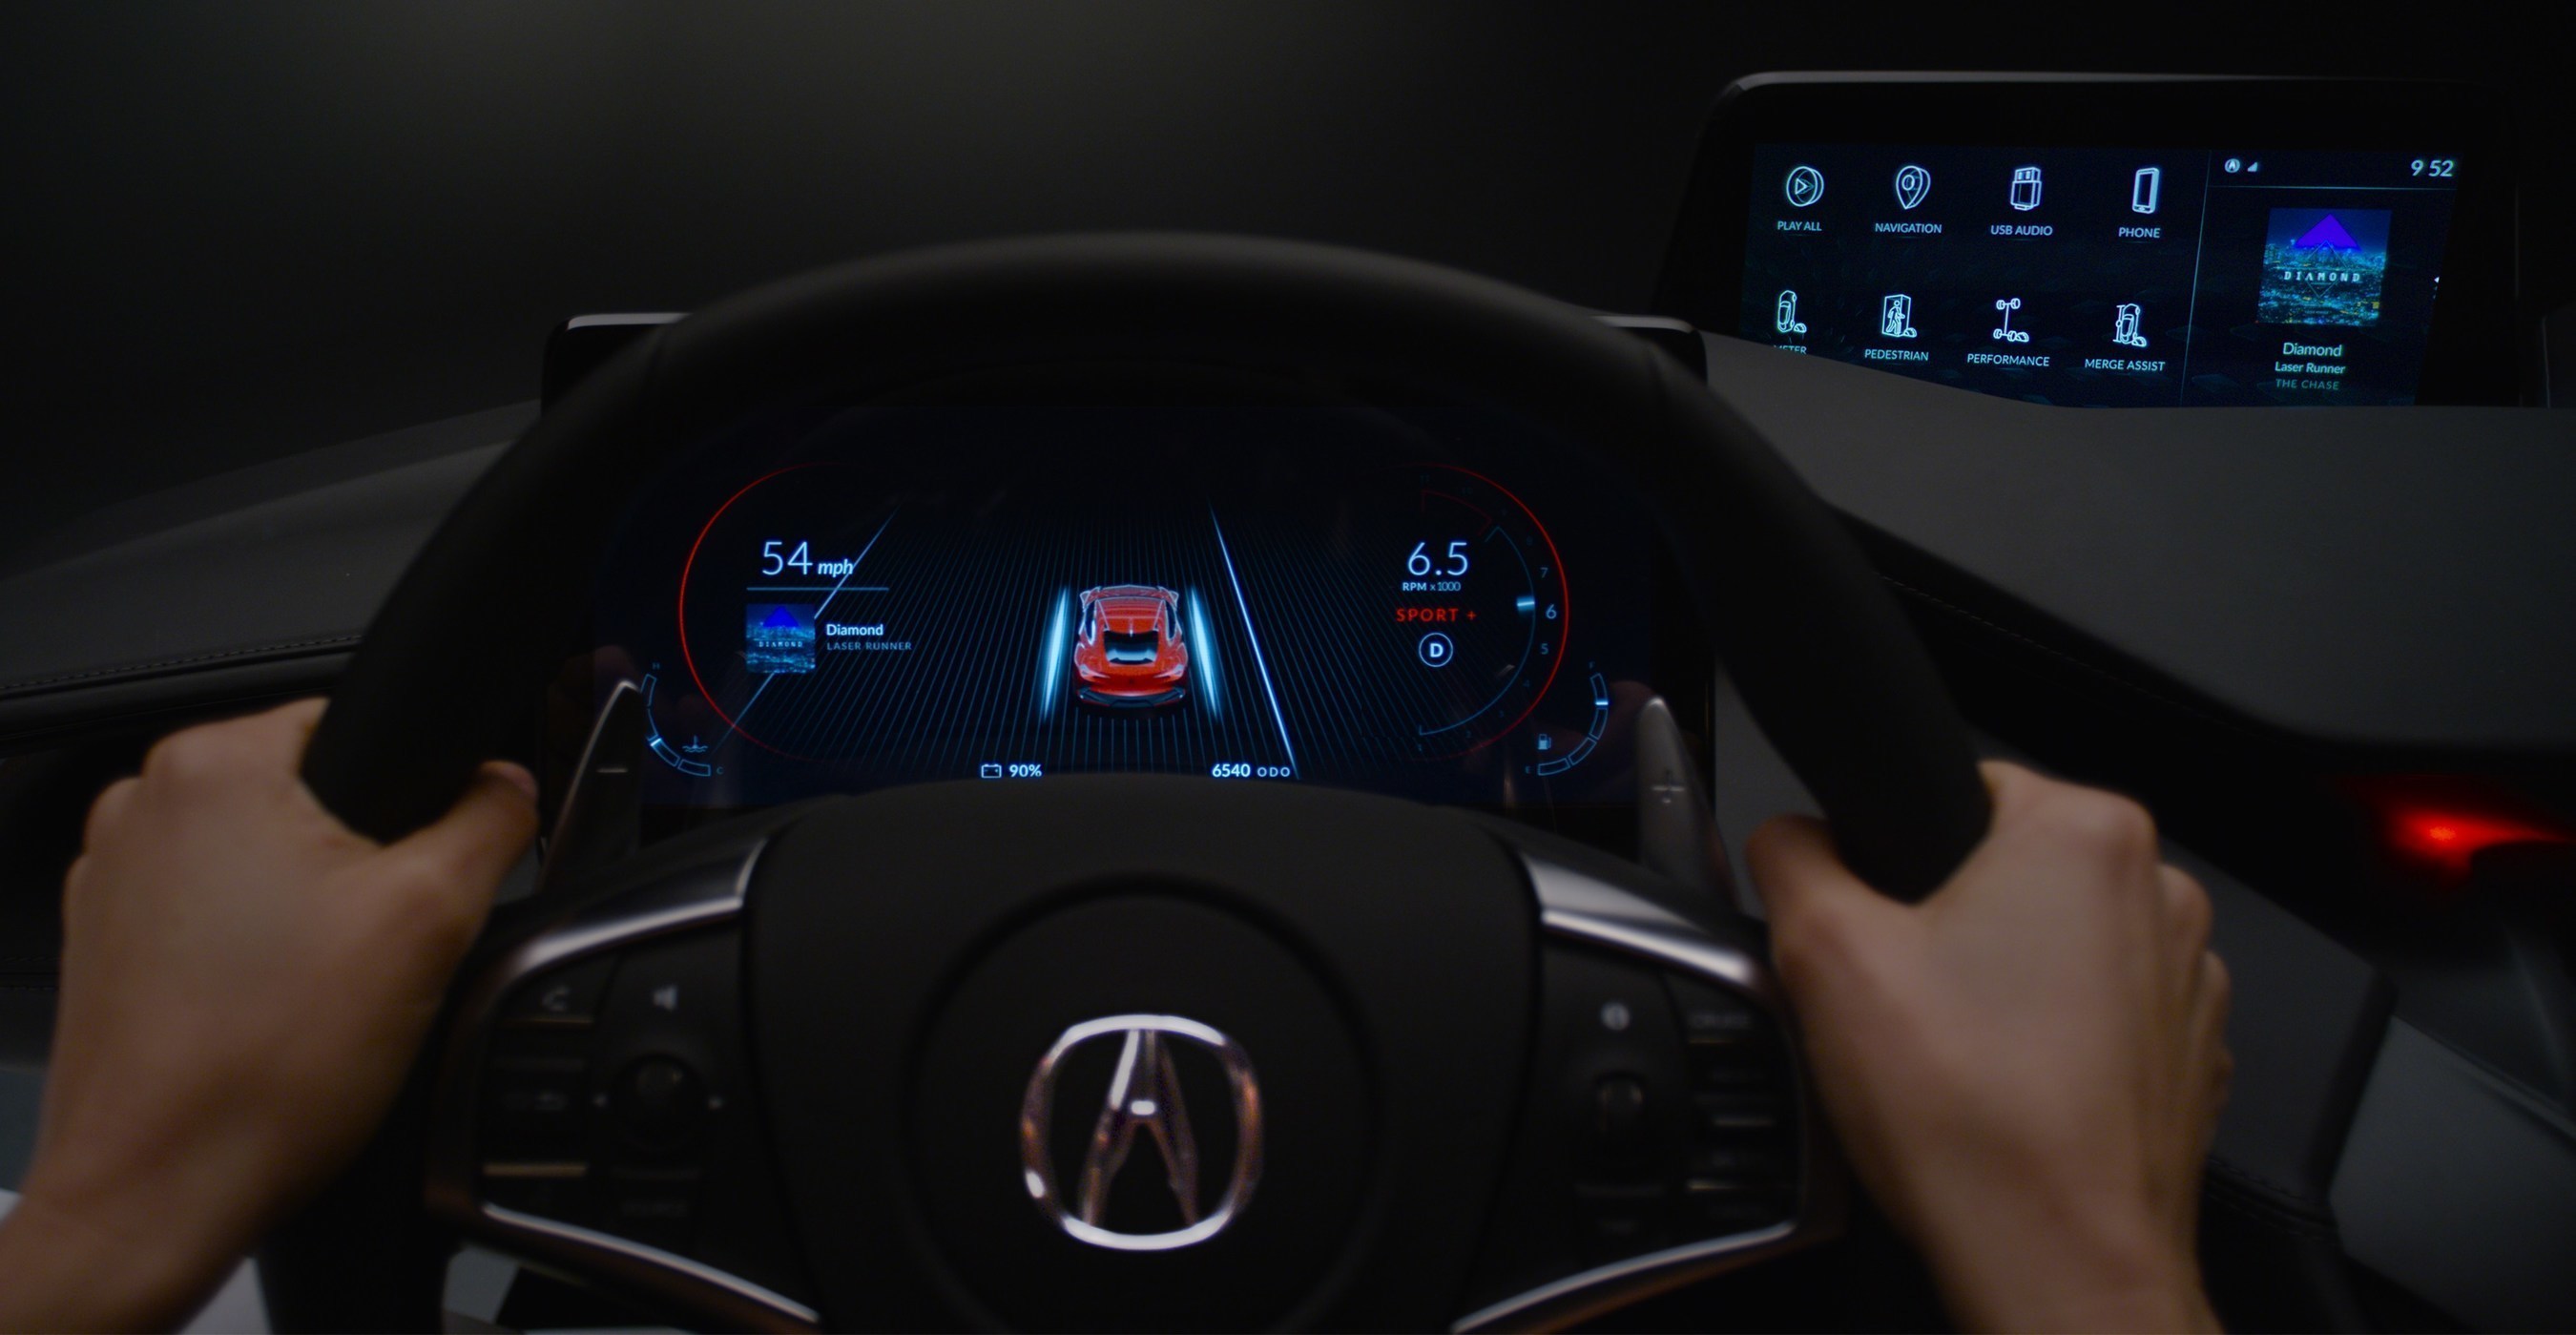 In automated mode, the driver's display displays other cars and road objects recognized by the vehicle's advanced sensors.